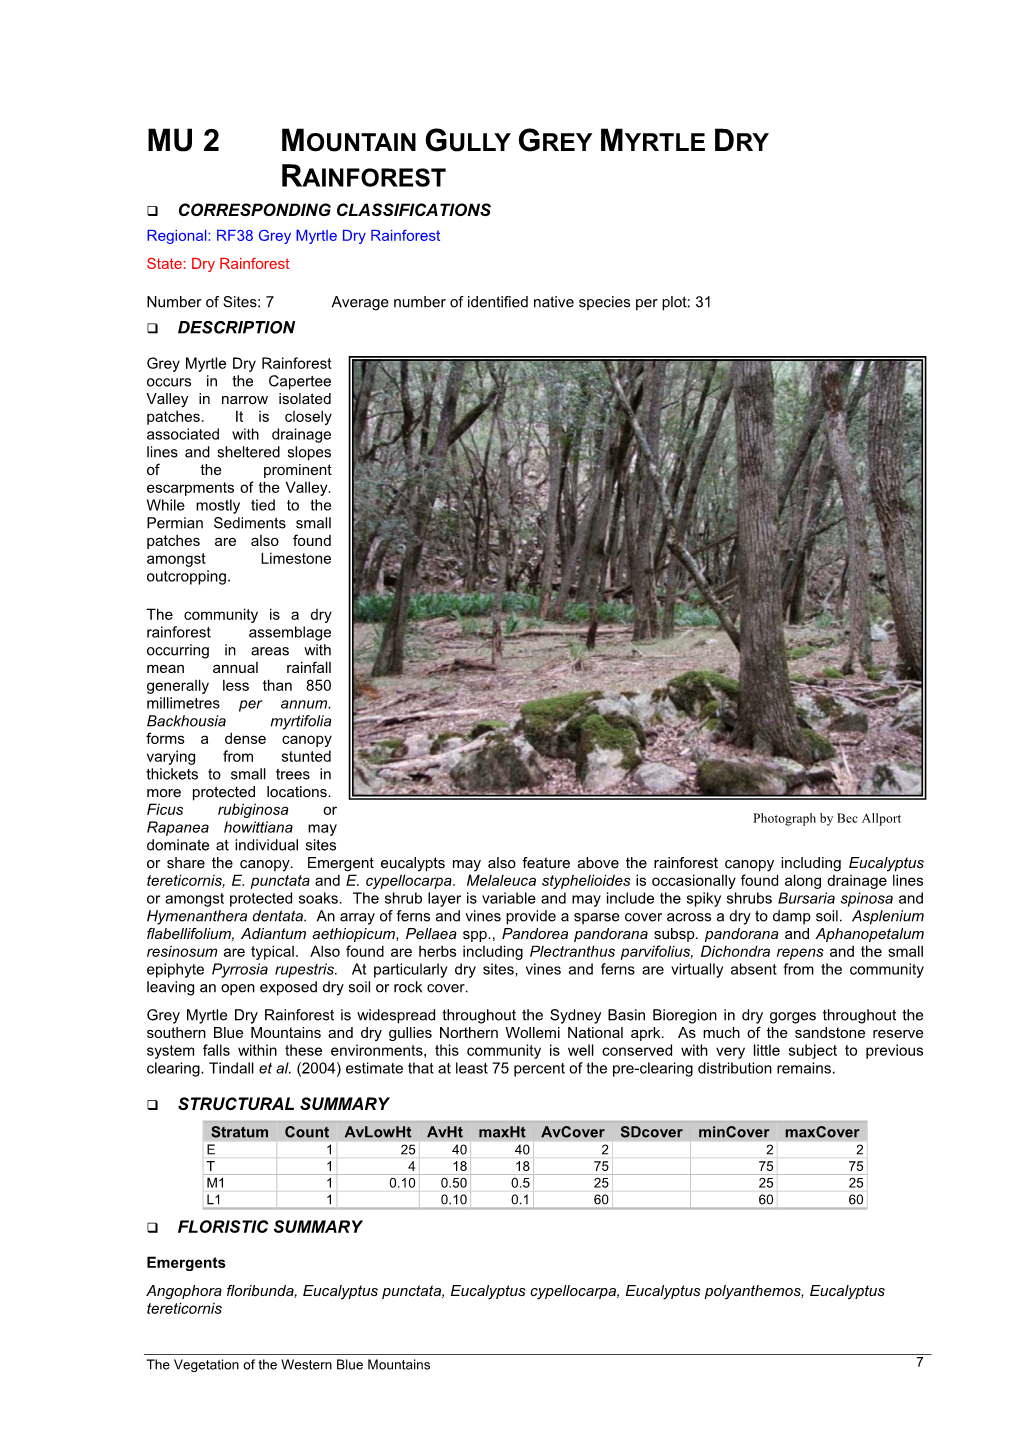 The Vegetation of the Western Blue Mountains Including the Capertee, Coxs, Jenolan & Gurnang Areas. Volume 2